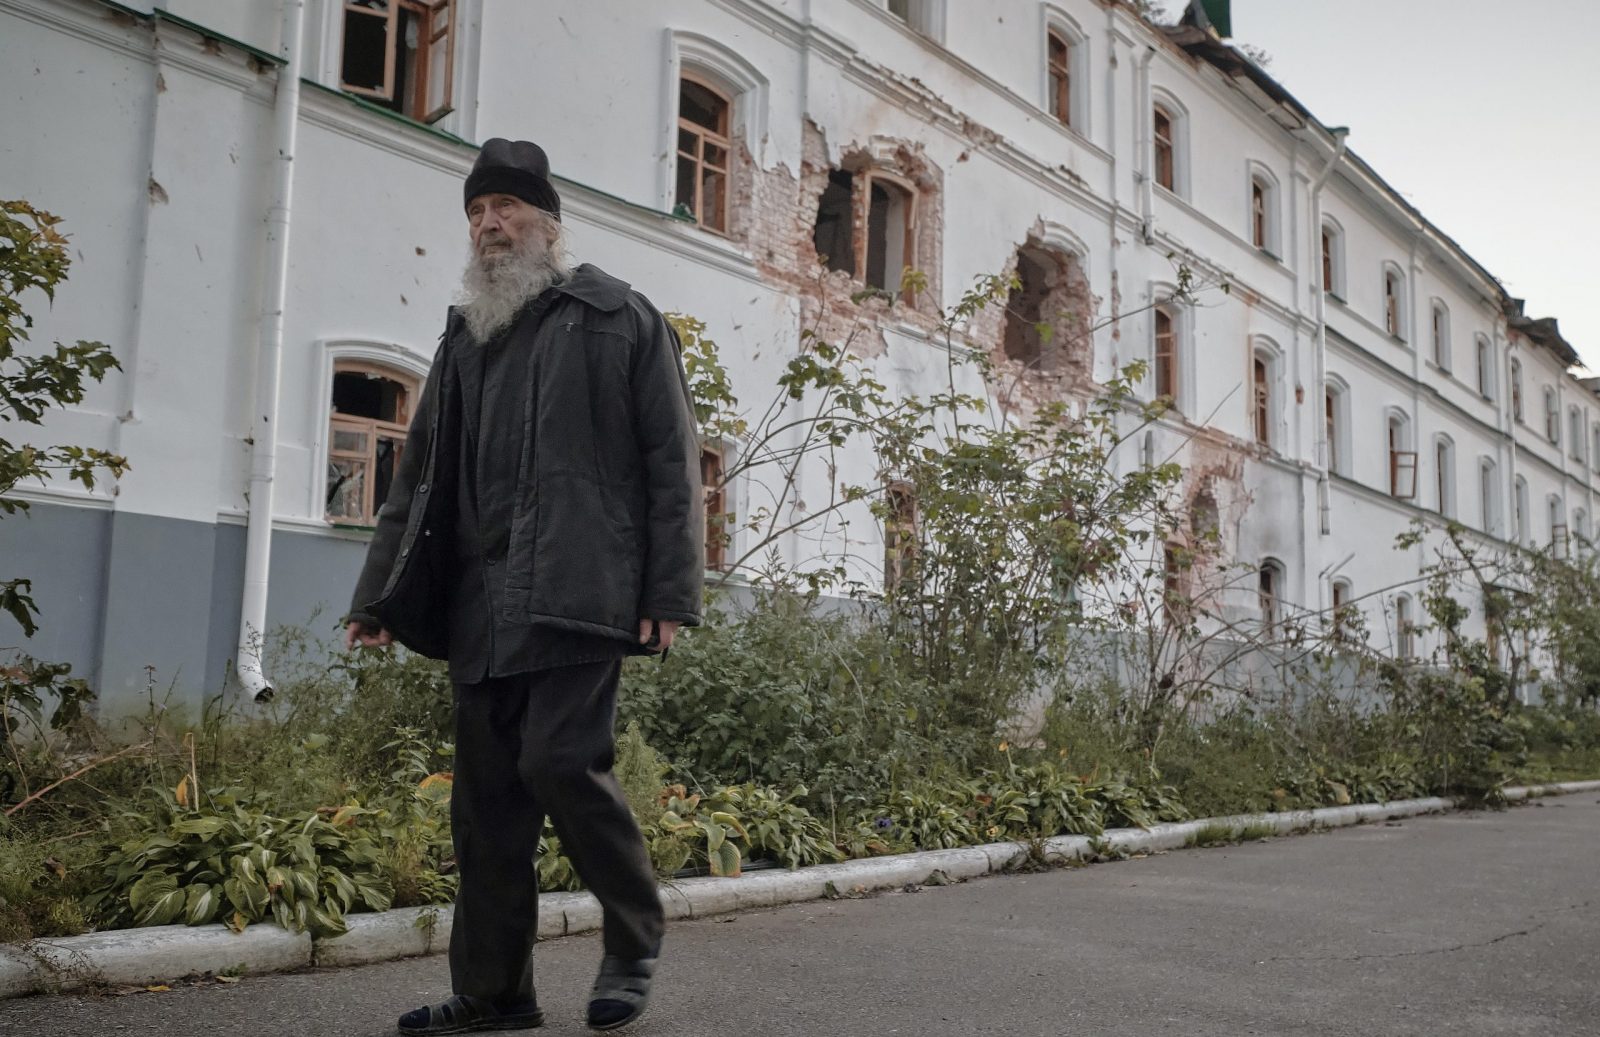 epa10222311 A monk walks past a damaged wall at the Sviatohirsk Lavra (cave monastery) in Sviatohirsk, Donetsk area, Ukraine, 03 October 2022 (issued 04 October 2022). Ukrainian forces recaptured the town of Sviatohirsk from Russian troops in September 2022. According to Ukrainian authorities, the major Orthodox Christian monastery of Sviatohirsk Lavra was damaged during Russian shelling on the town in June 2022. Russian troops entered Ukraine on 24 February 2022 starting a conflict that has provoked destruction and a humanitarian crisis.  EPA/YEVGEN HONCHARENKO